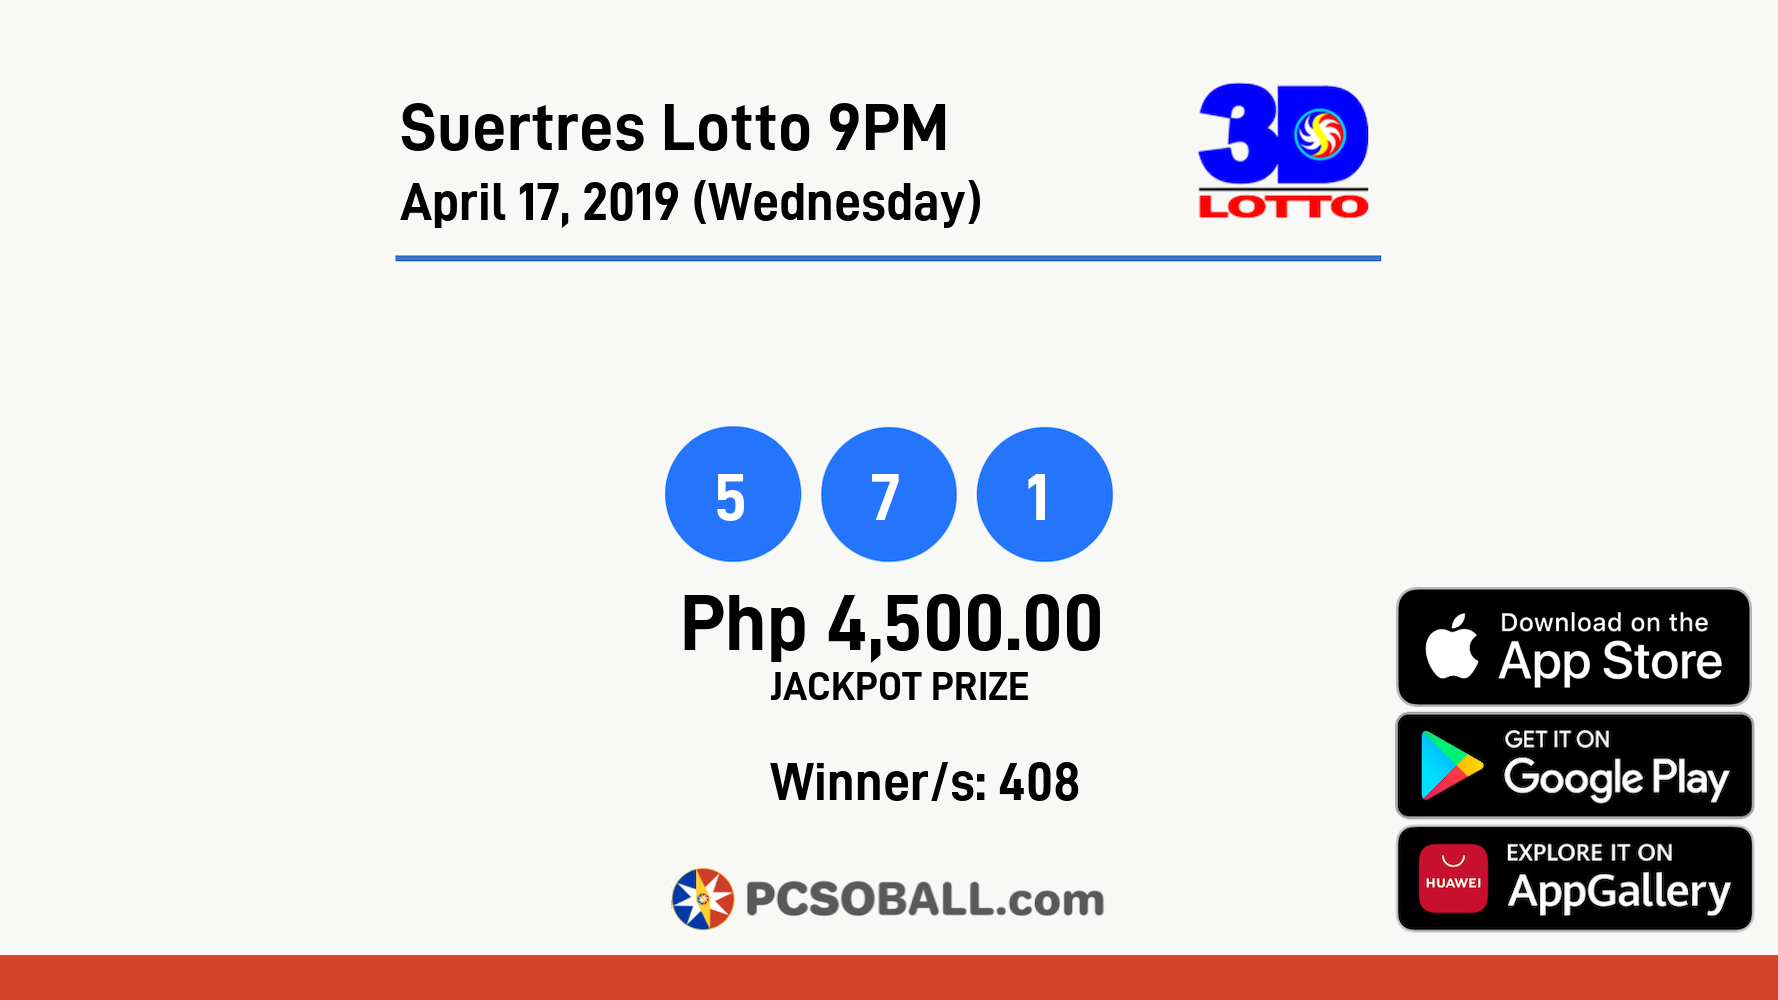 Suertres Lotto 9PM April 17, 2019 (Wednesday) Result